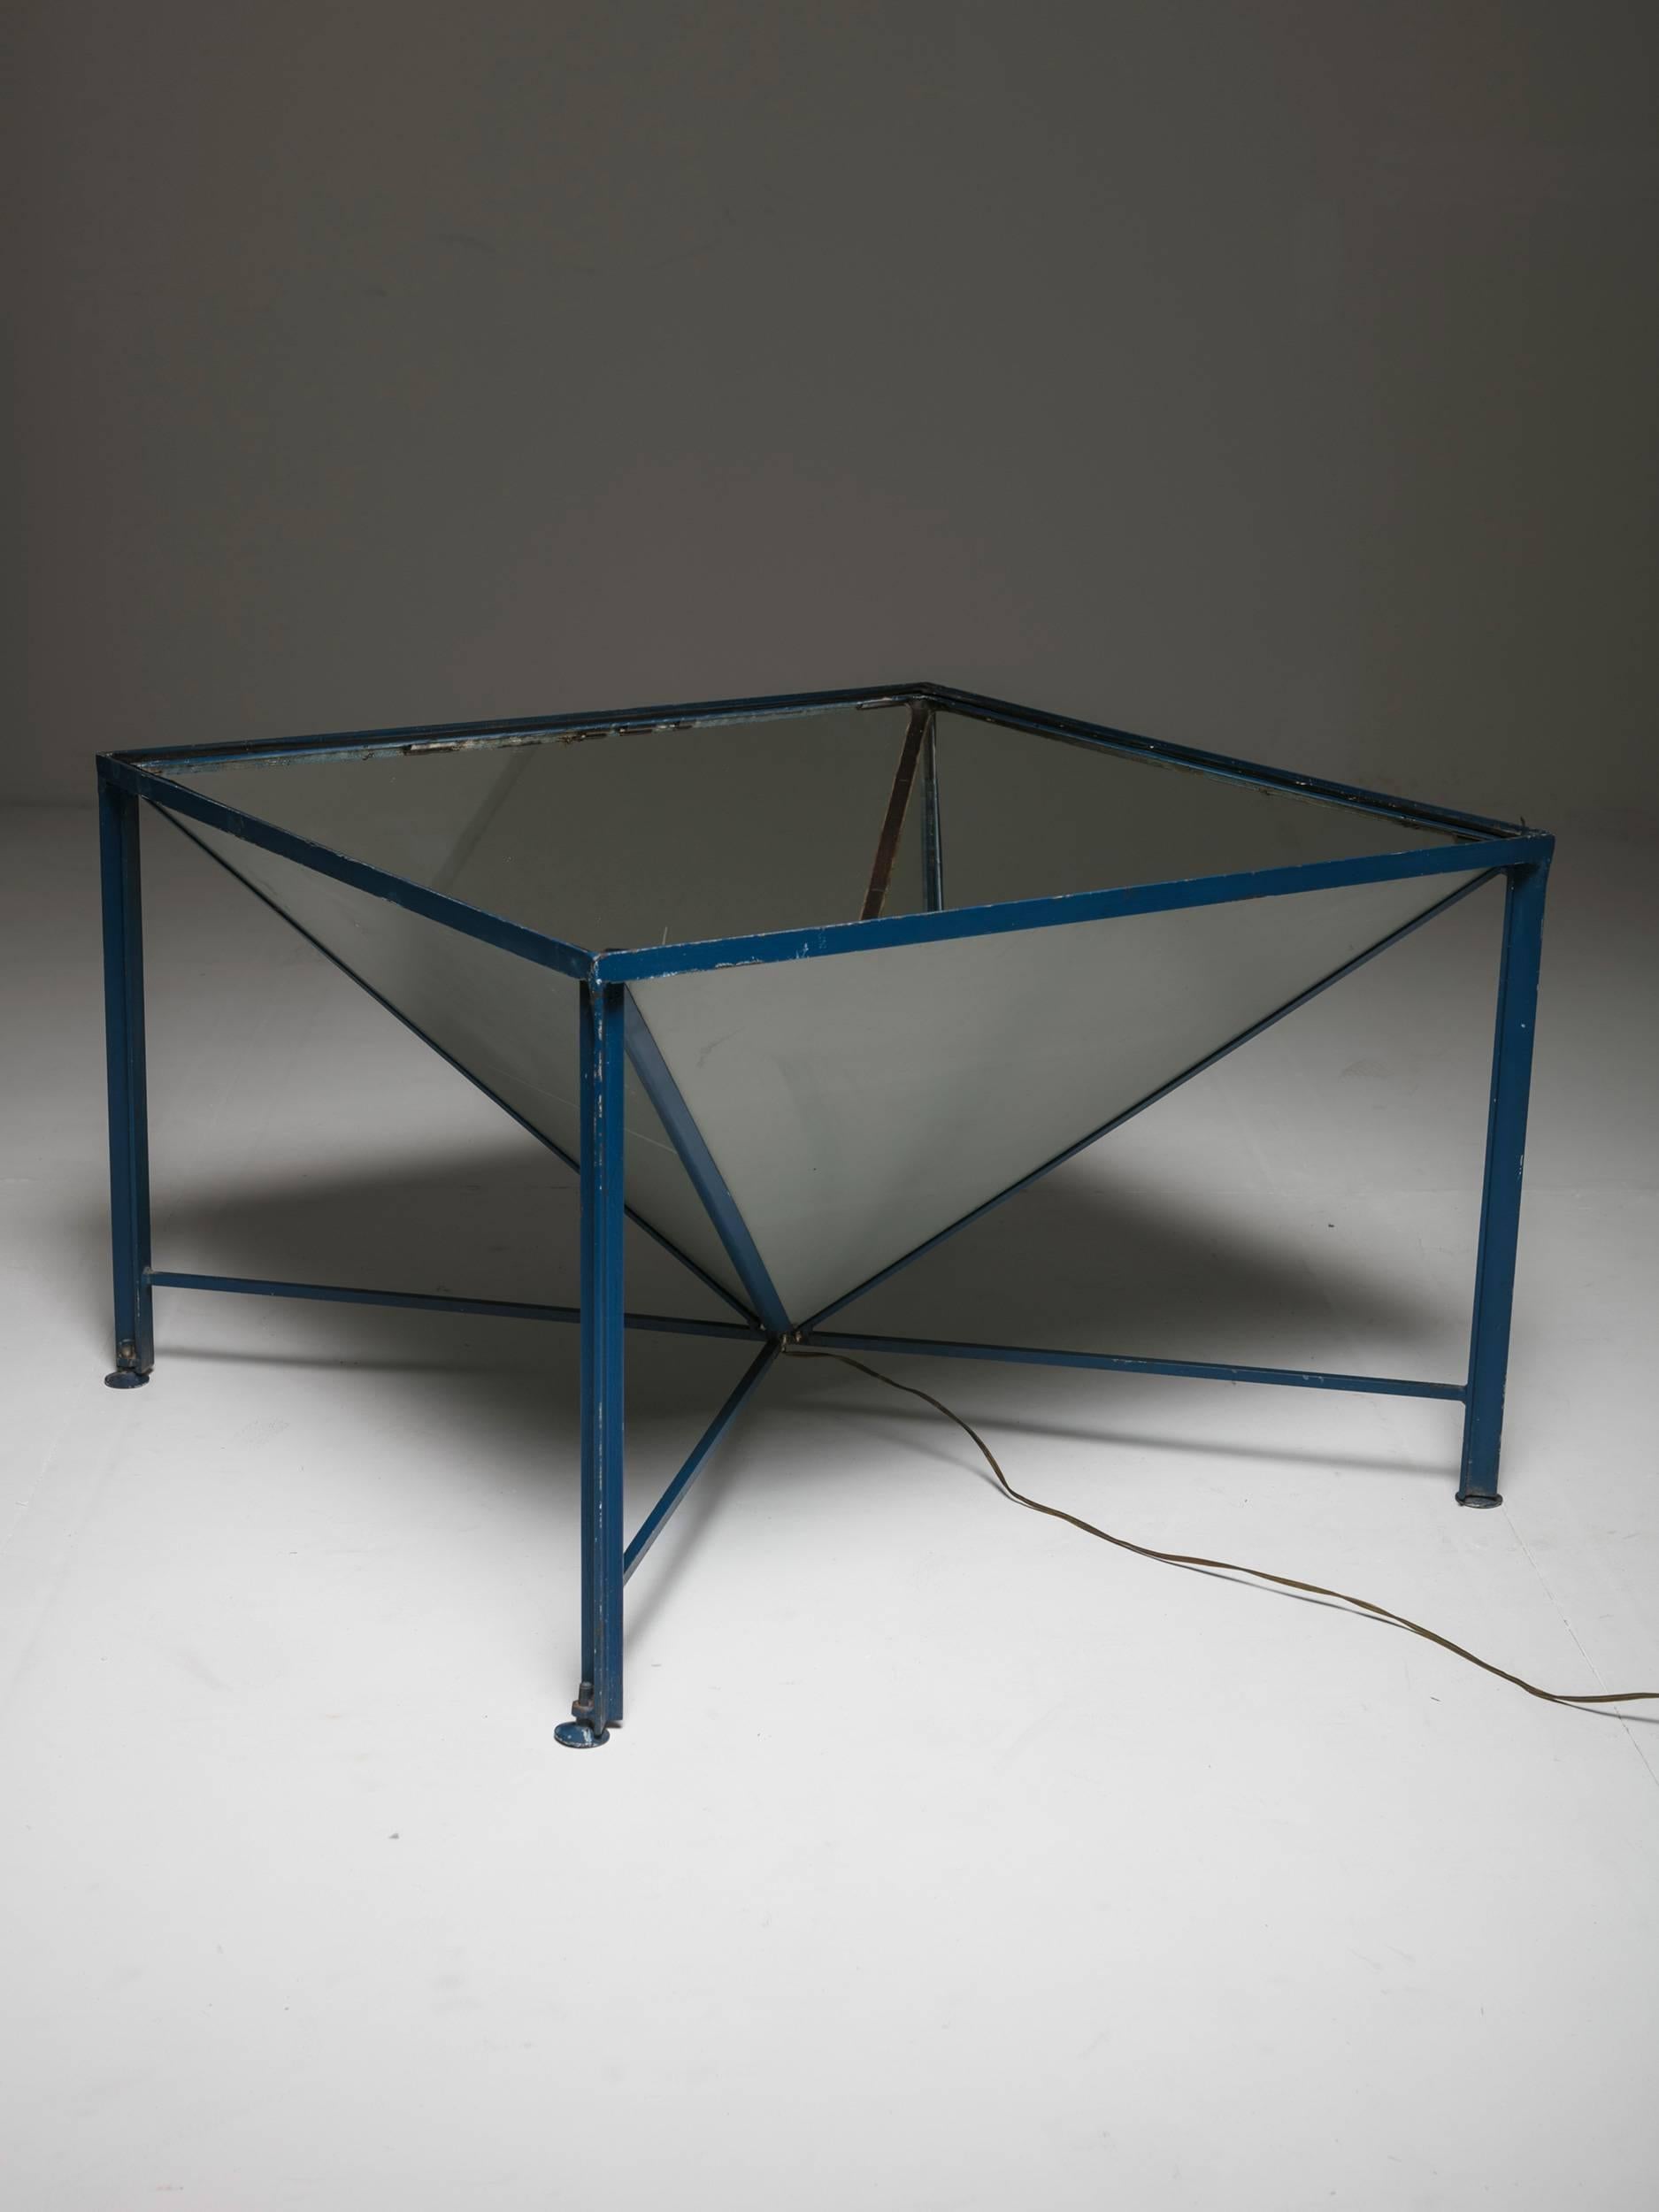 One-off lighting table.
Enameled blue metal frame support a bottom up mirrored glass pyramid with a light in the lower part. Adjustable feet and thick transparent glass top.